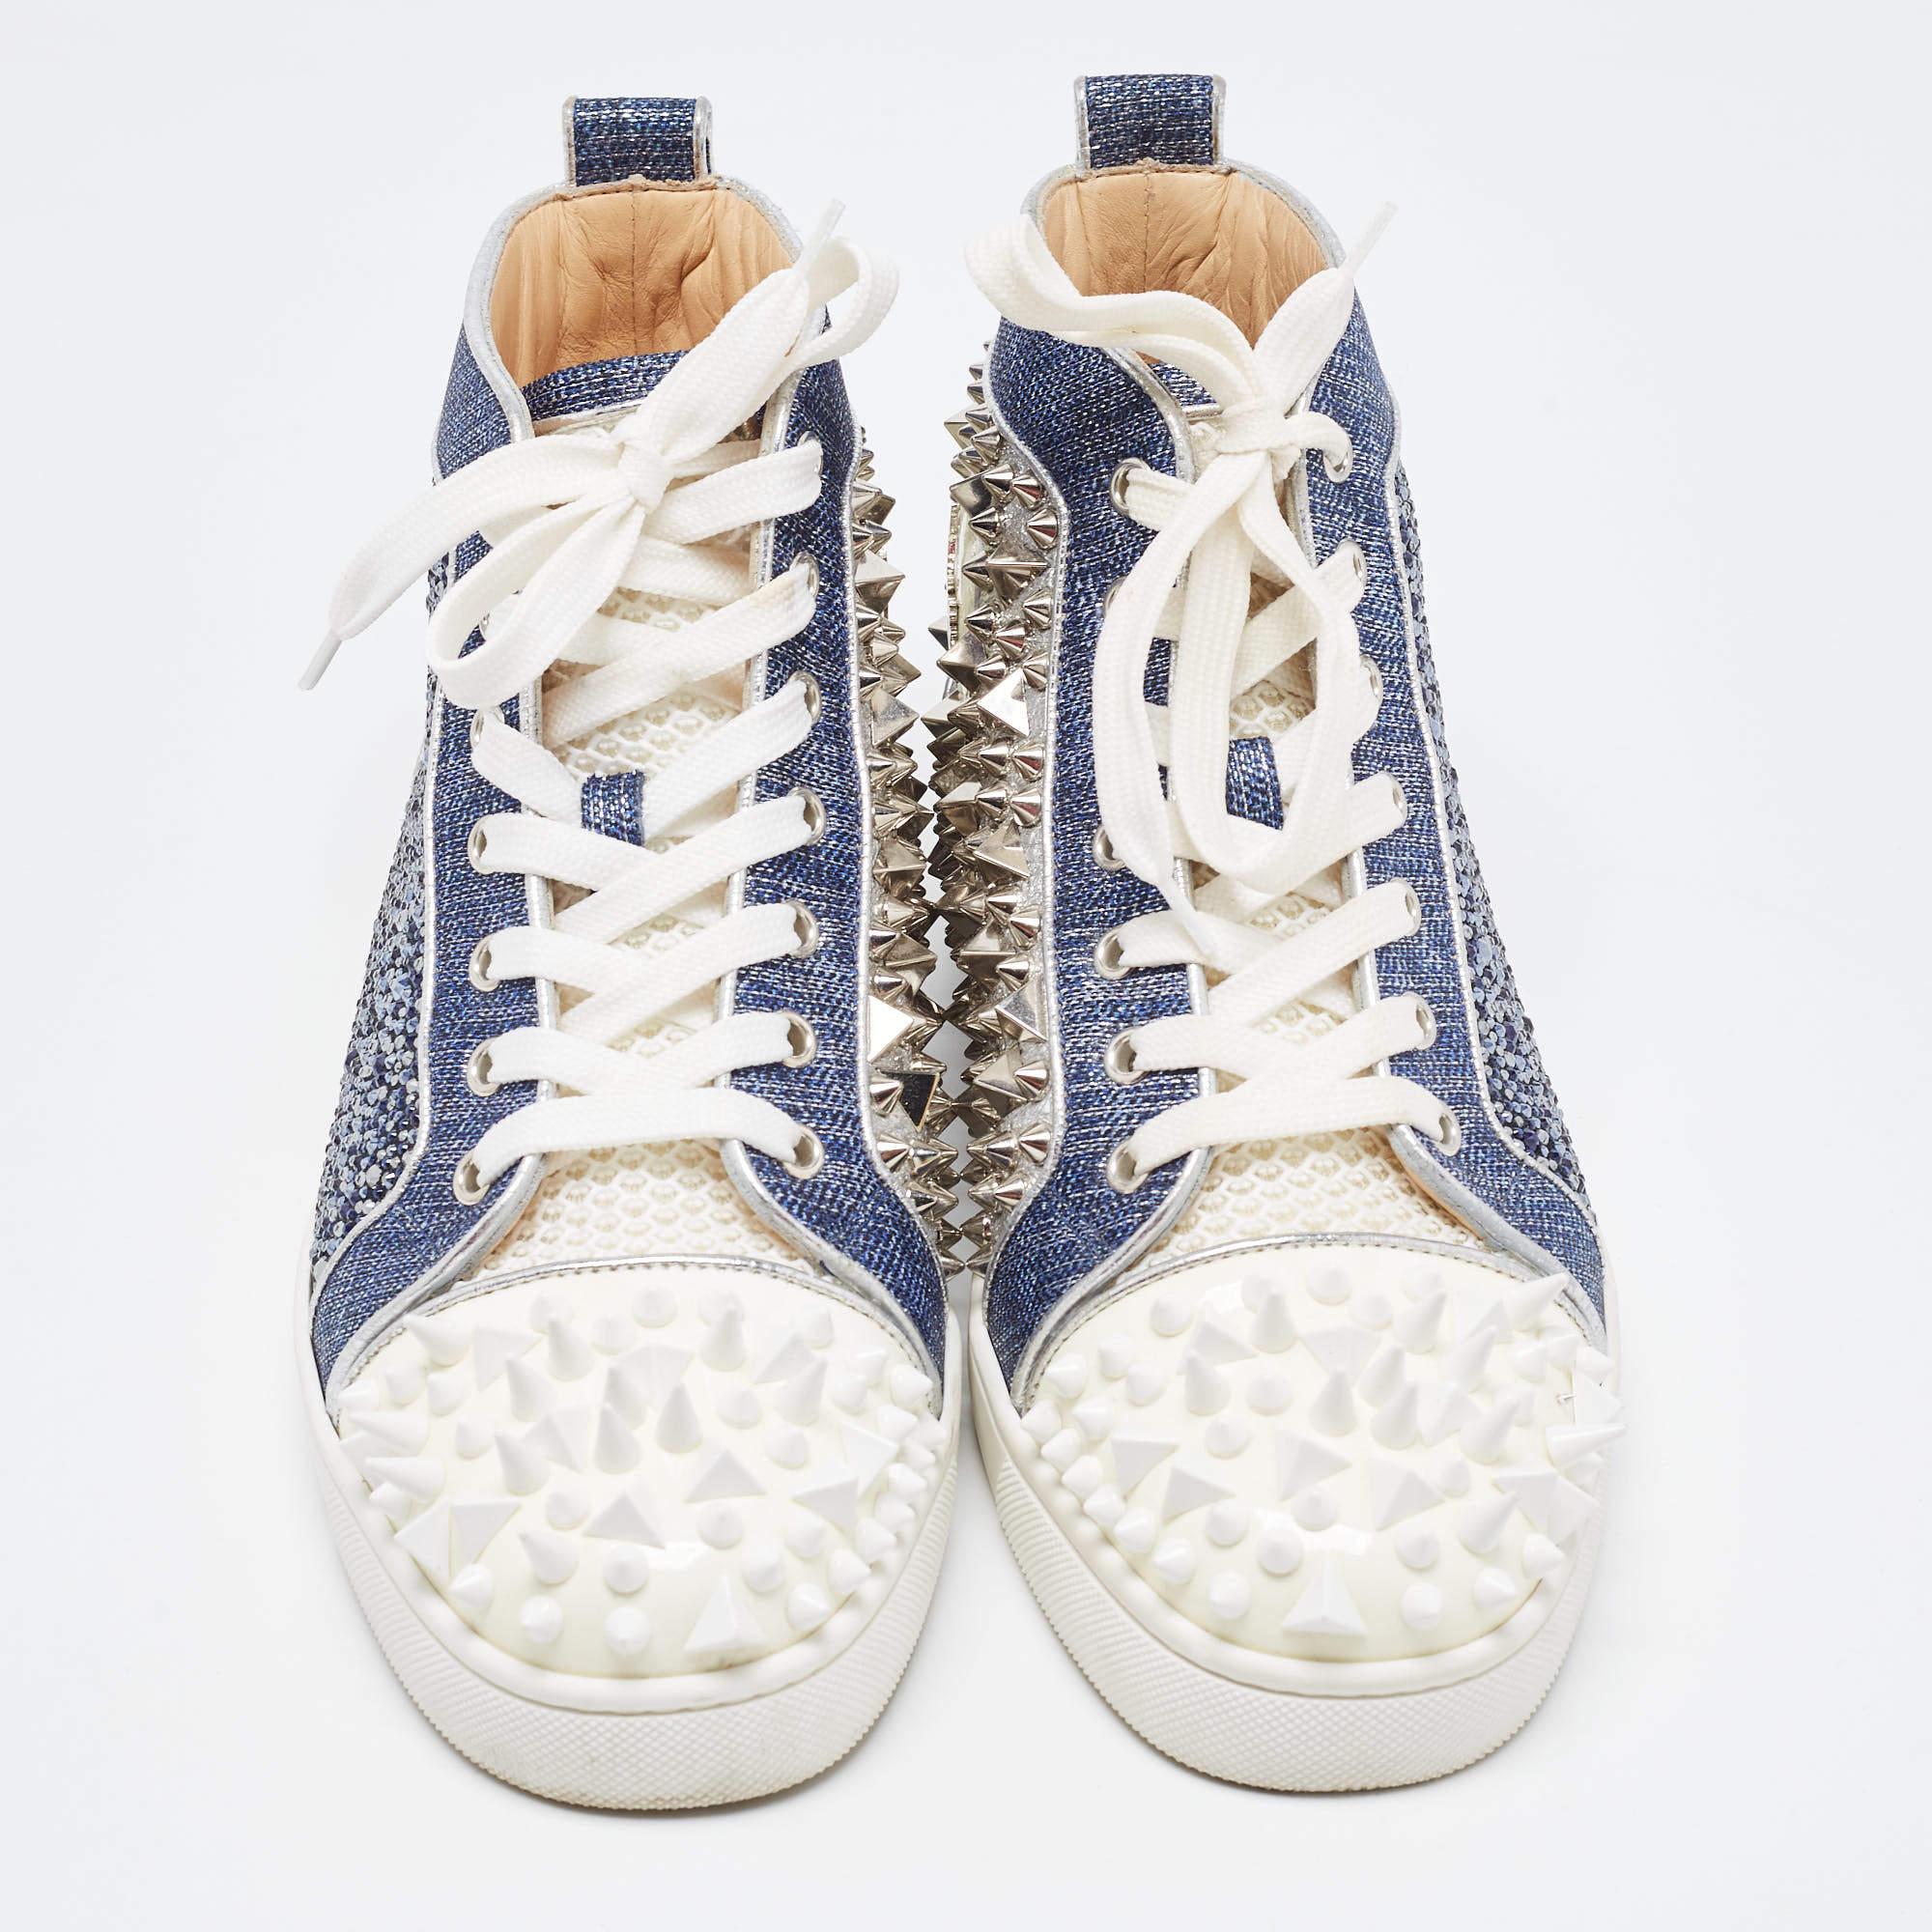 Christian Louboutin Blue/Silver Denim and Patent Lou Degra Spikes Studded Hi Hig In Good Condition For Sale In Dubai, Al Qouz 2